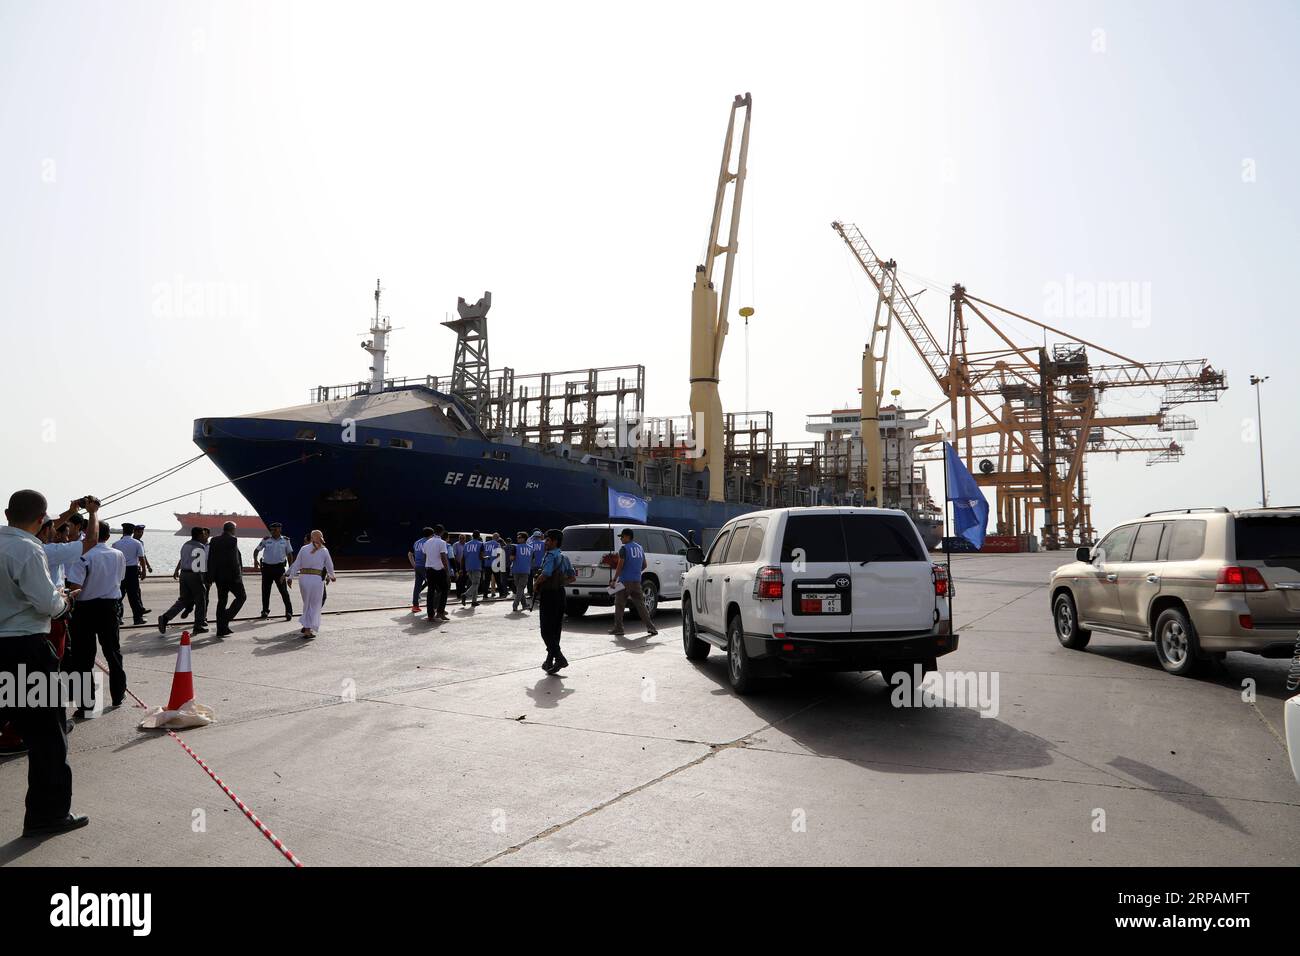 (190515) -- HODEIDAH, May 15, 2019 -- UN team members arrive at the Hodeidah port for a press conference in Hodeidah, Yemen, on May 14, 2019. The UN monitoring mission in Yemen on Tuesday welcomed the Houthi rebels handover of the security of Hodeidah ports to the coast guards. YEMEN-HODEIDAH-UN-PRESS CONFERENCE nieyunpeng PUBLICATIONxNOTxINxCHN Stock Photo